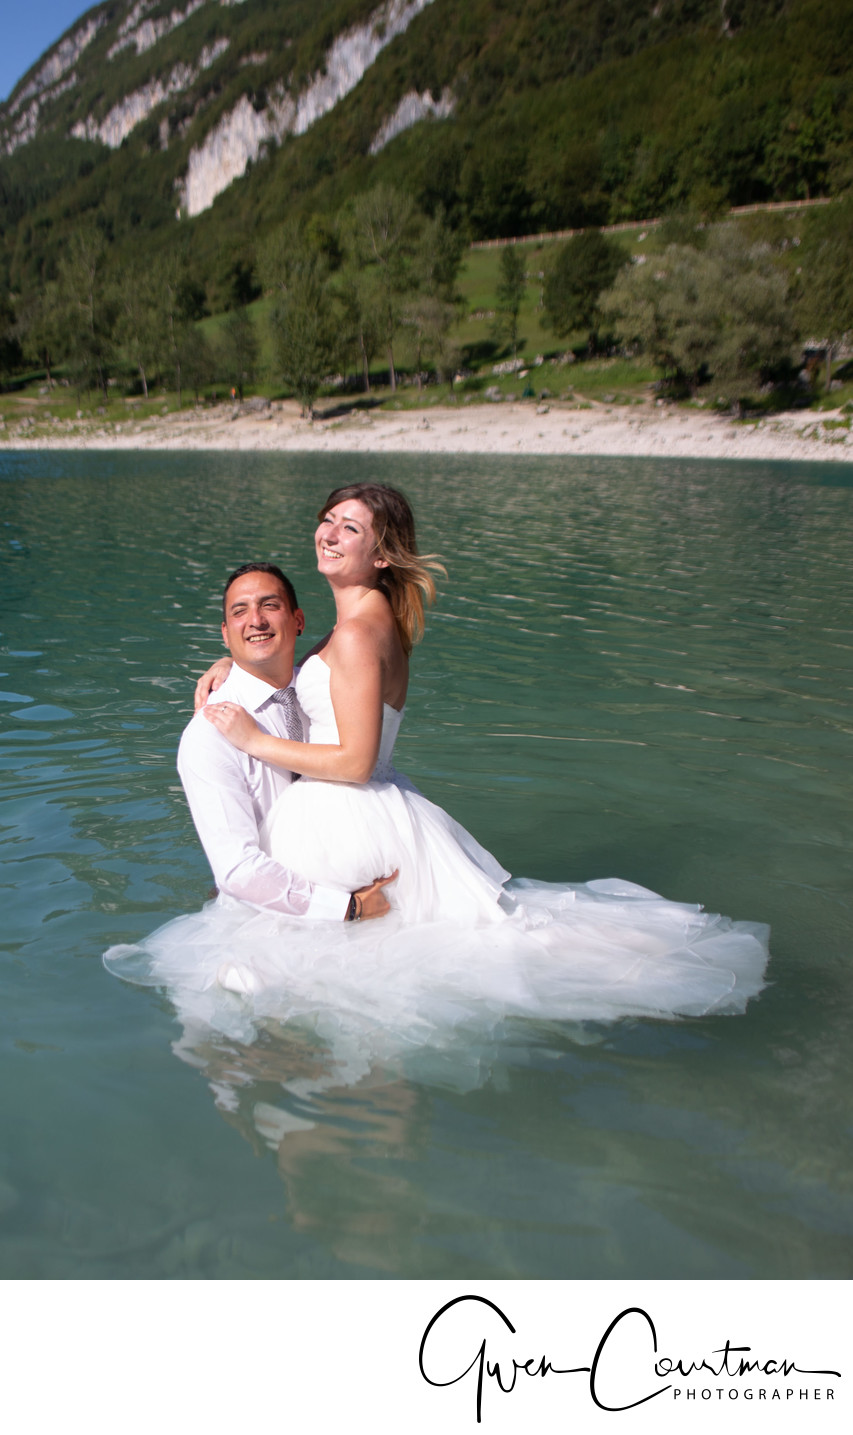 Fun Drown the gown photos in Italy, in the water